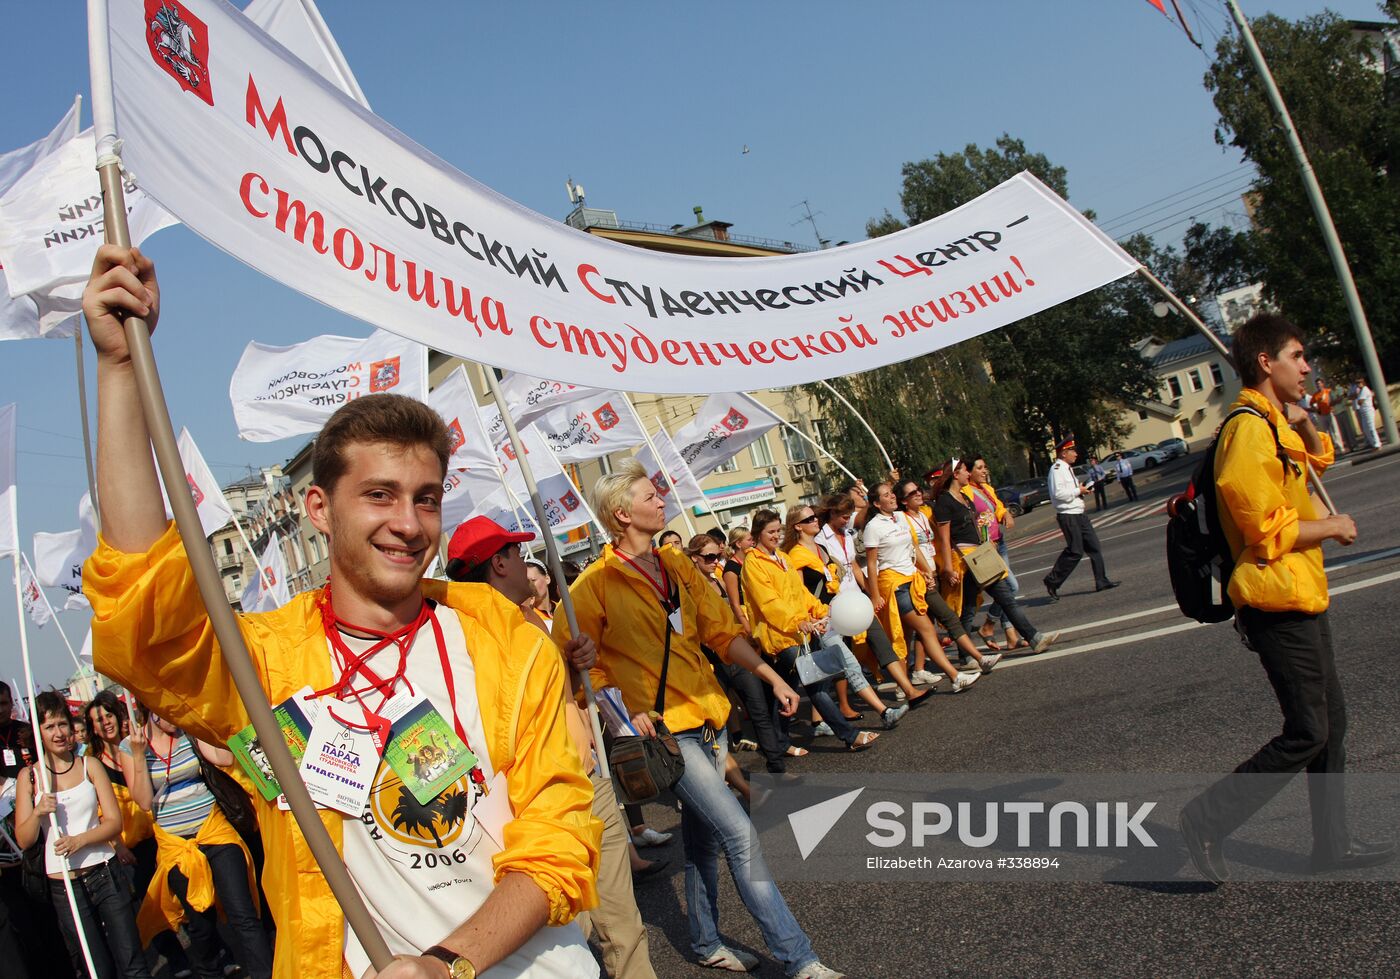 Moscow student parade